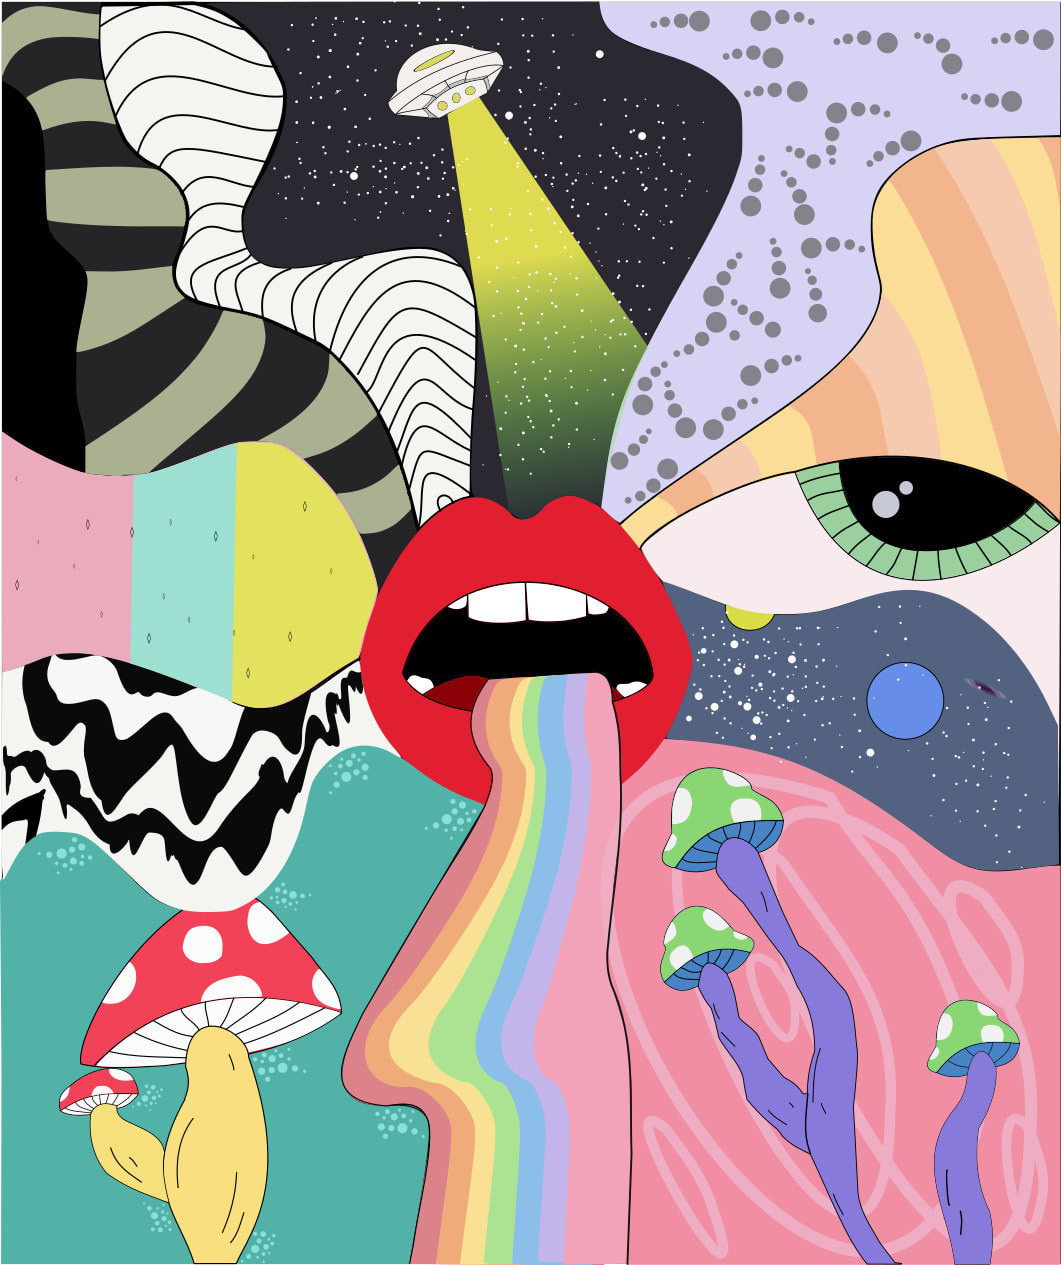 Draw awesome psychedelic design art by Bayuzuiger | Fiverr